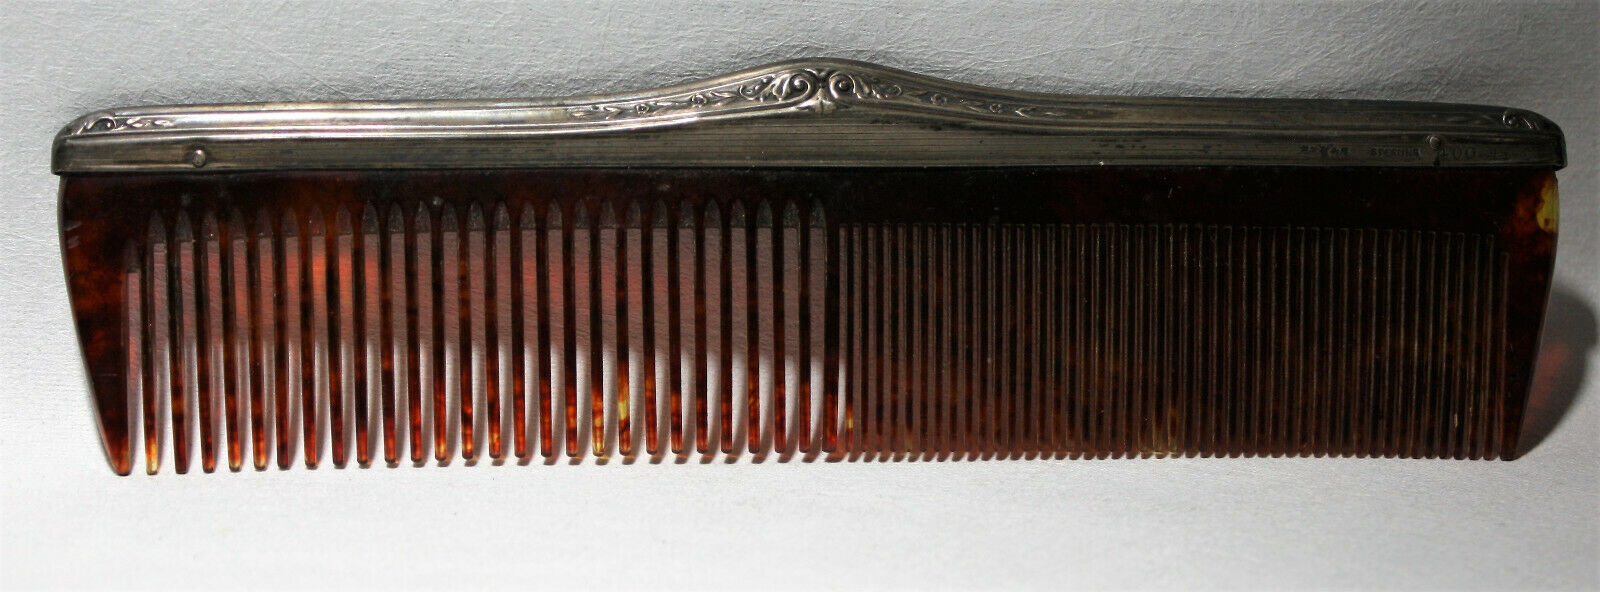 Vintage 1930s R Wallace & Sons Sterling Silver and Bakelite Dresser Comb 400-41